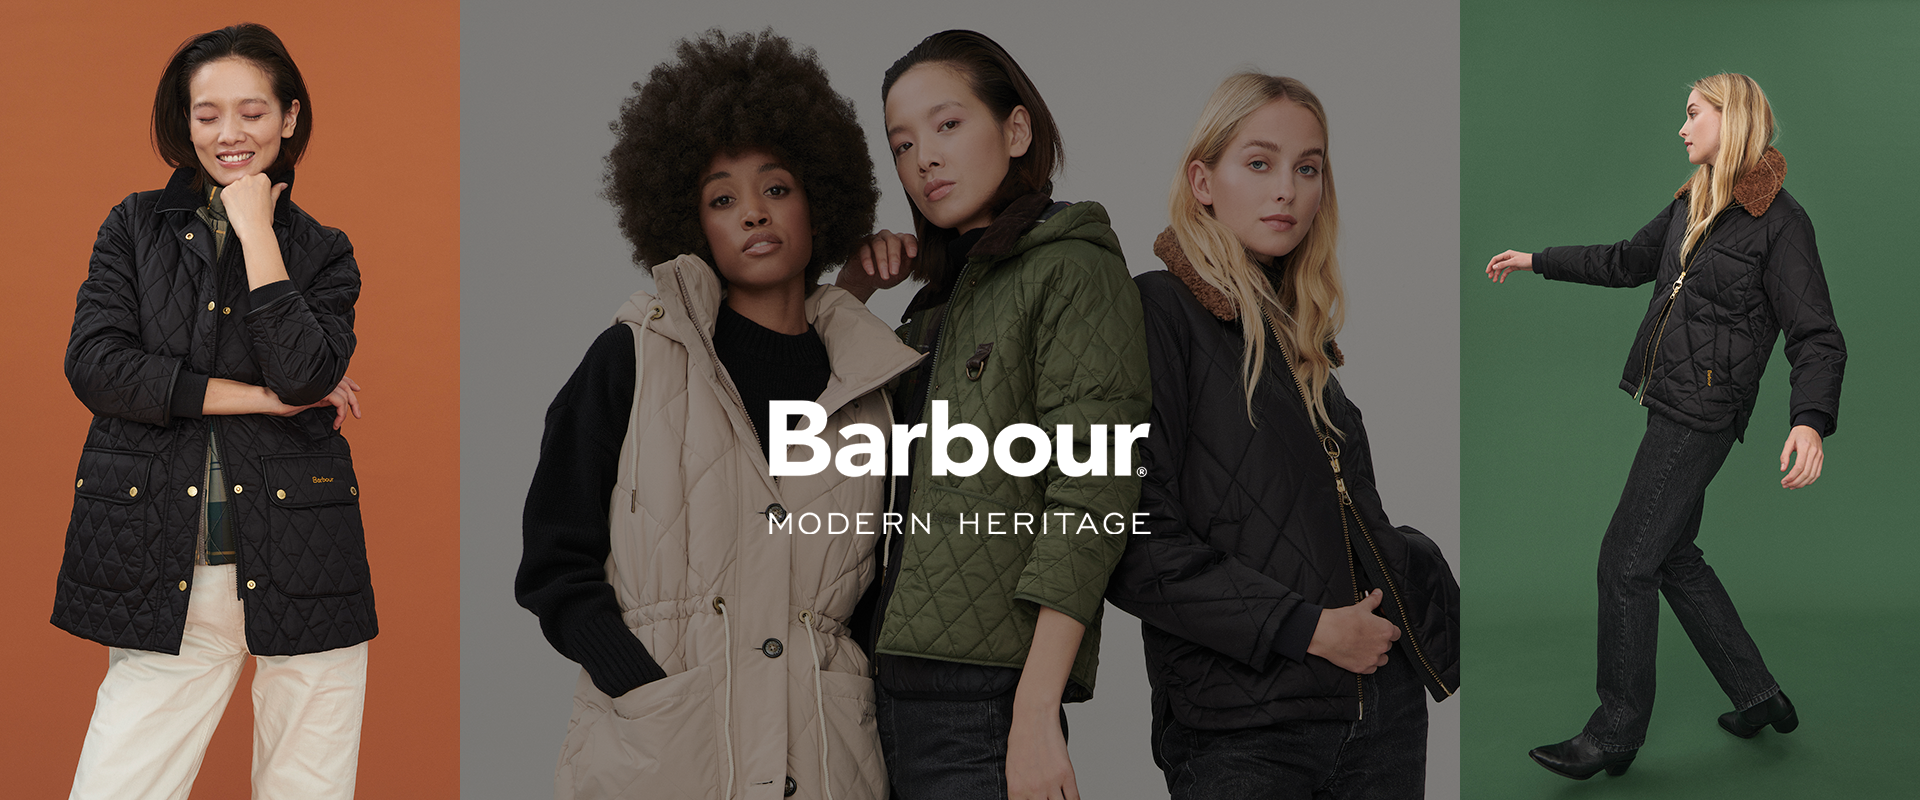 lanthaan opwinding caravan Modern Heritage | Discover the Women's Collection | Barbour